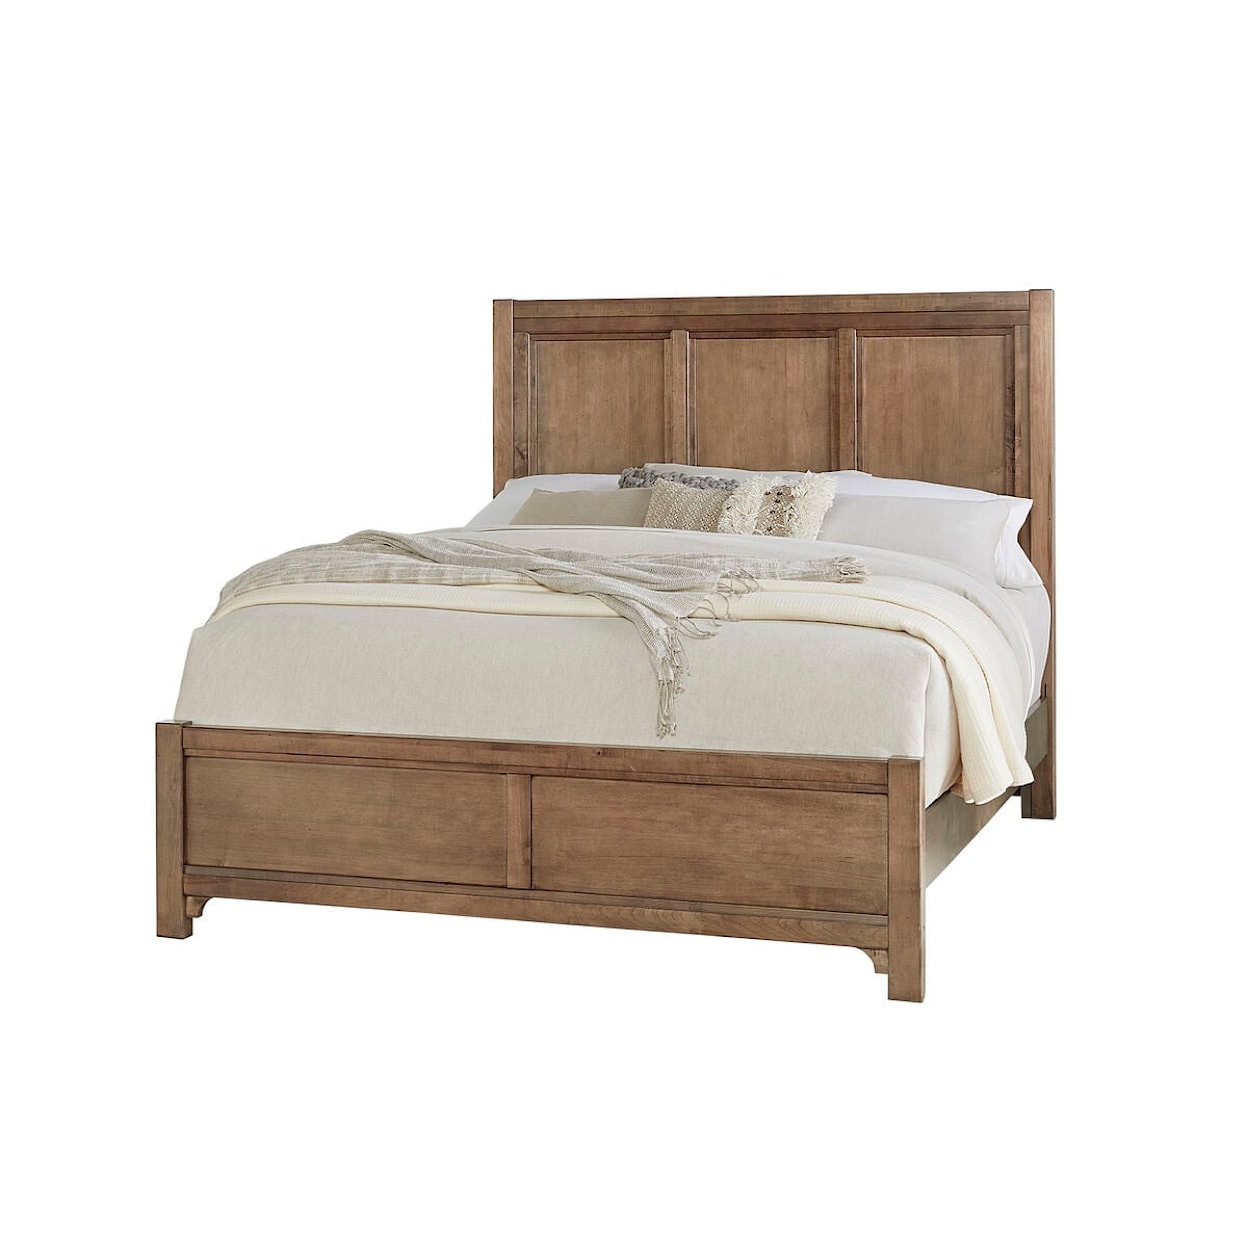 Vaughan Bassett Cool Farmhouse King Panel Bed with Metal Slats